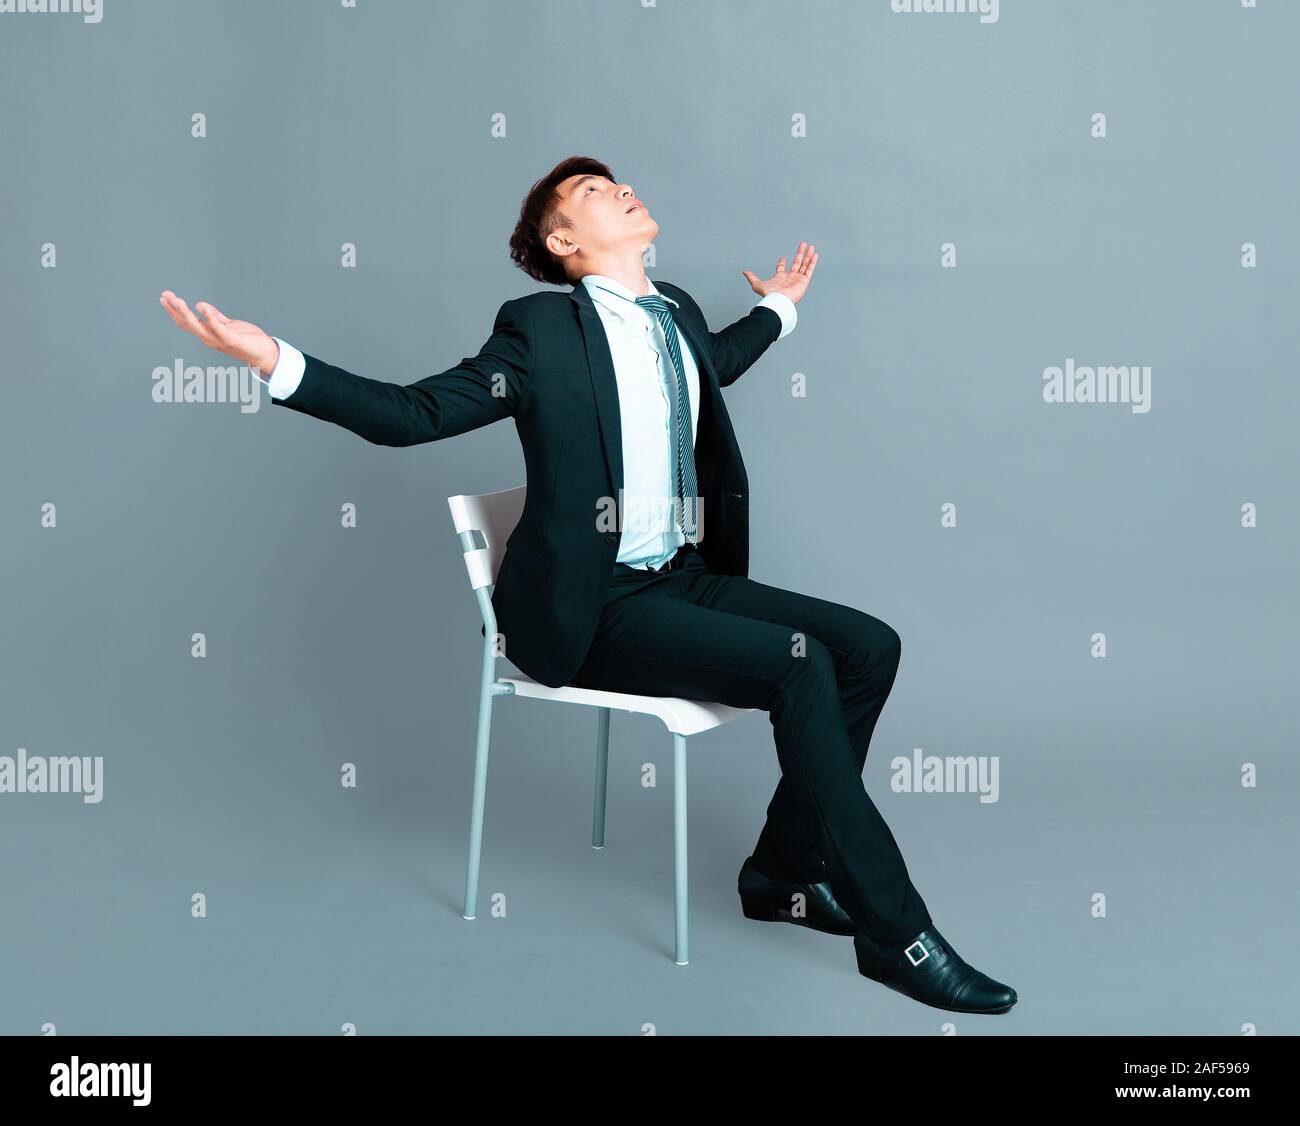 young business man sitting and looking up Stock Photo